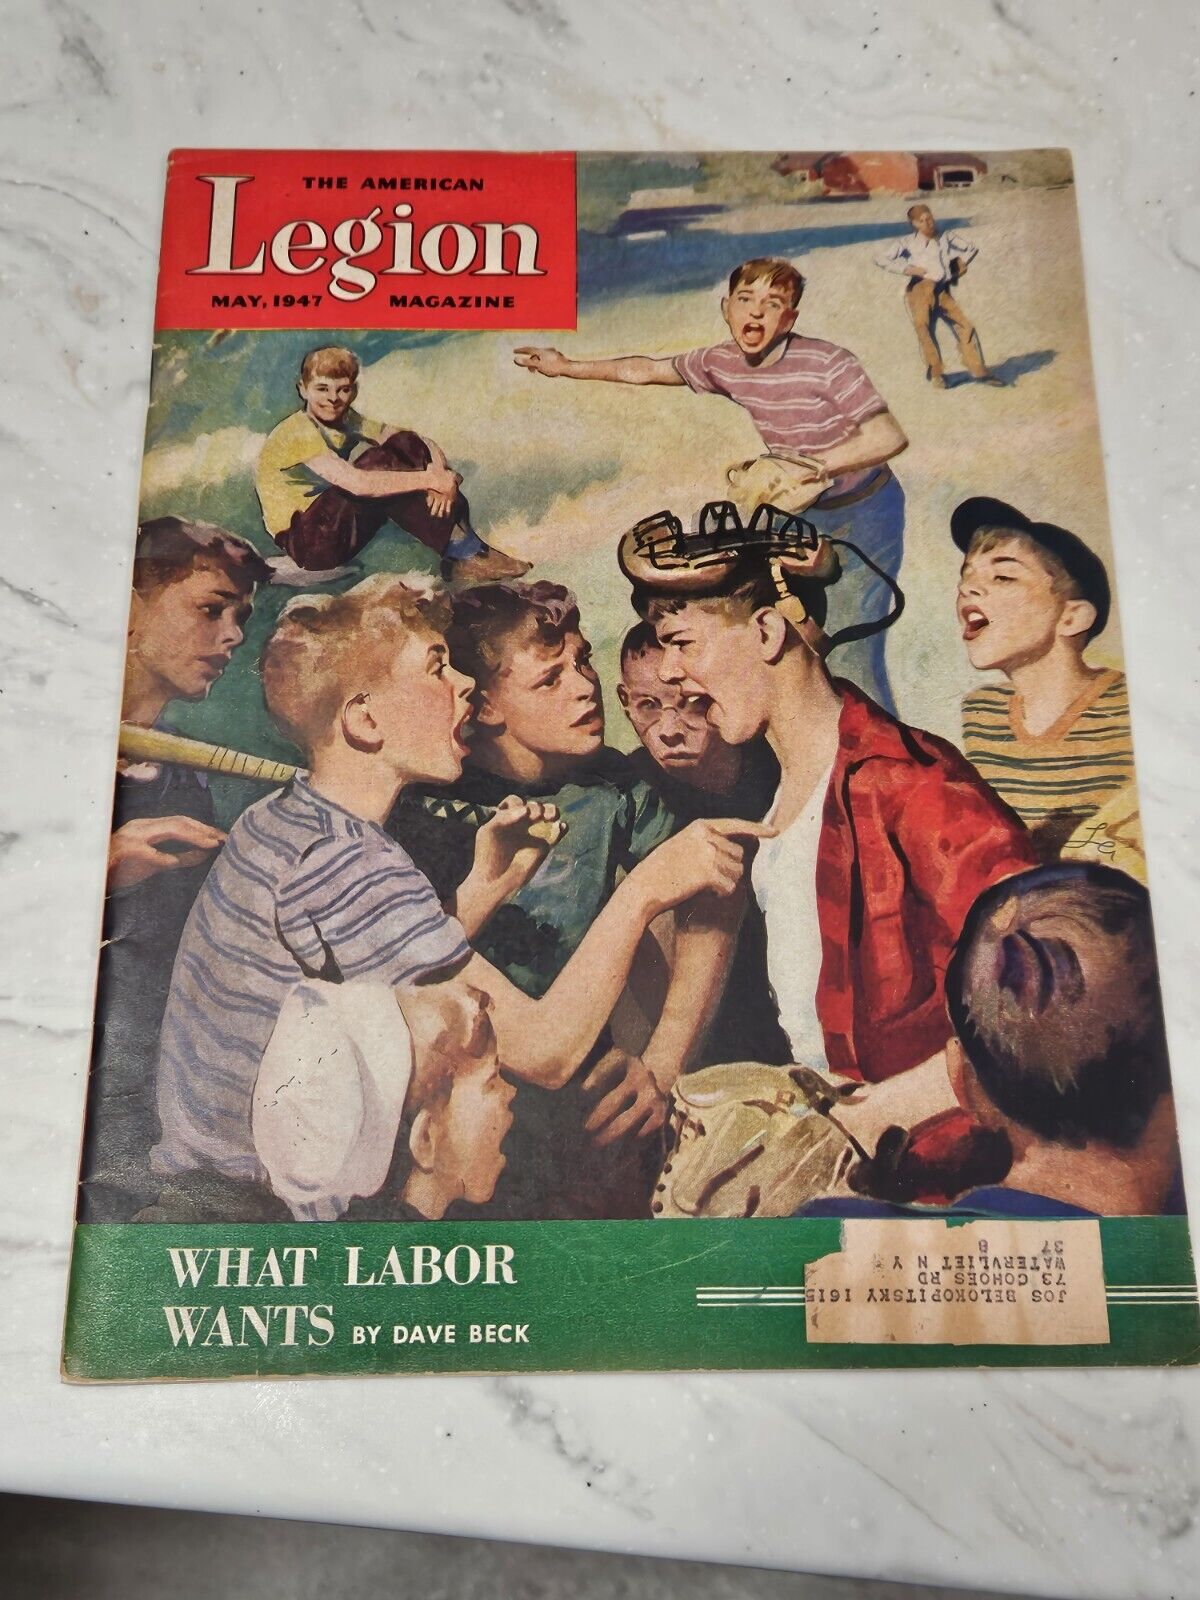 Vintage May 1947 The American Legion Magazine Complete Issue Very Good Condtion